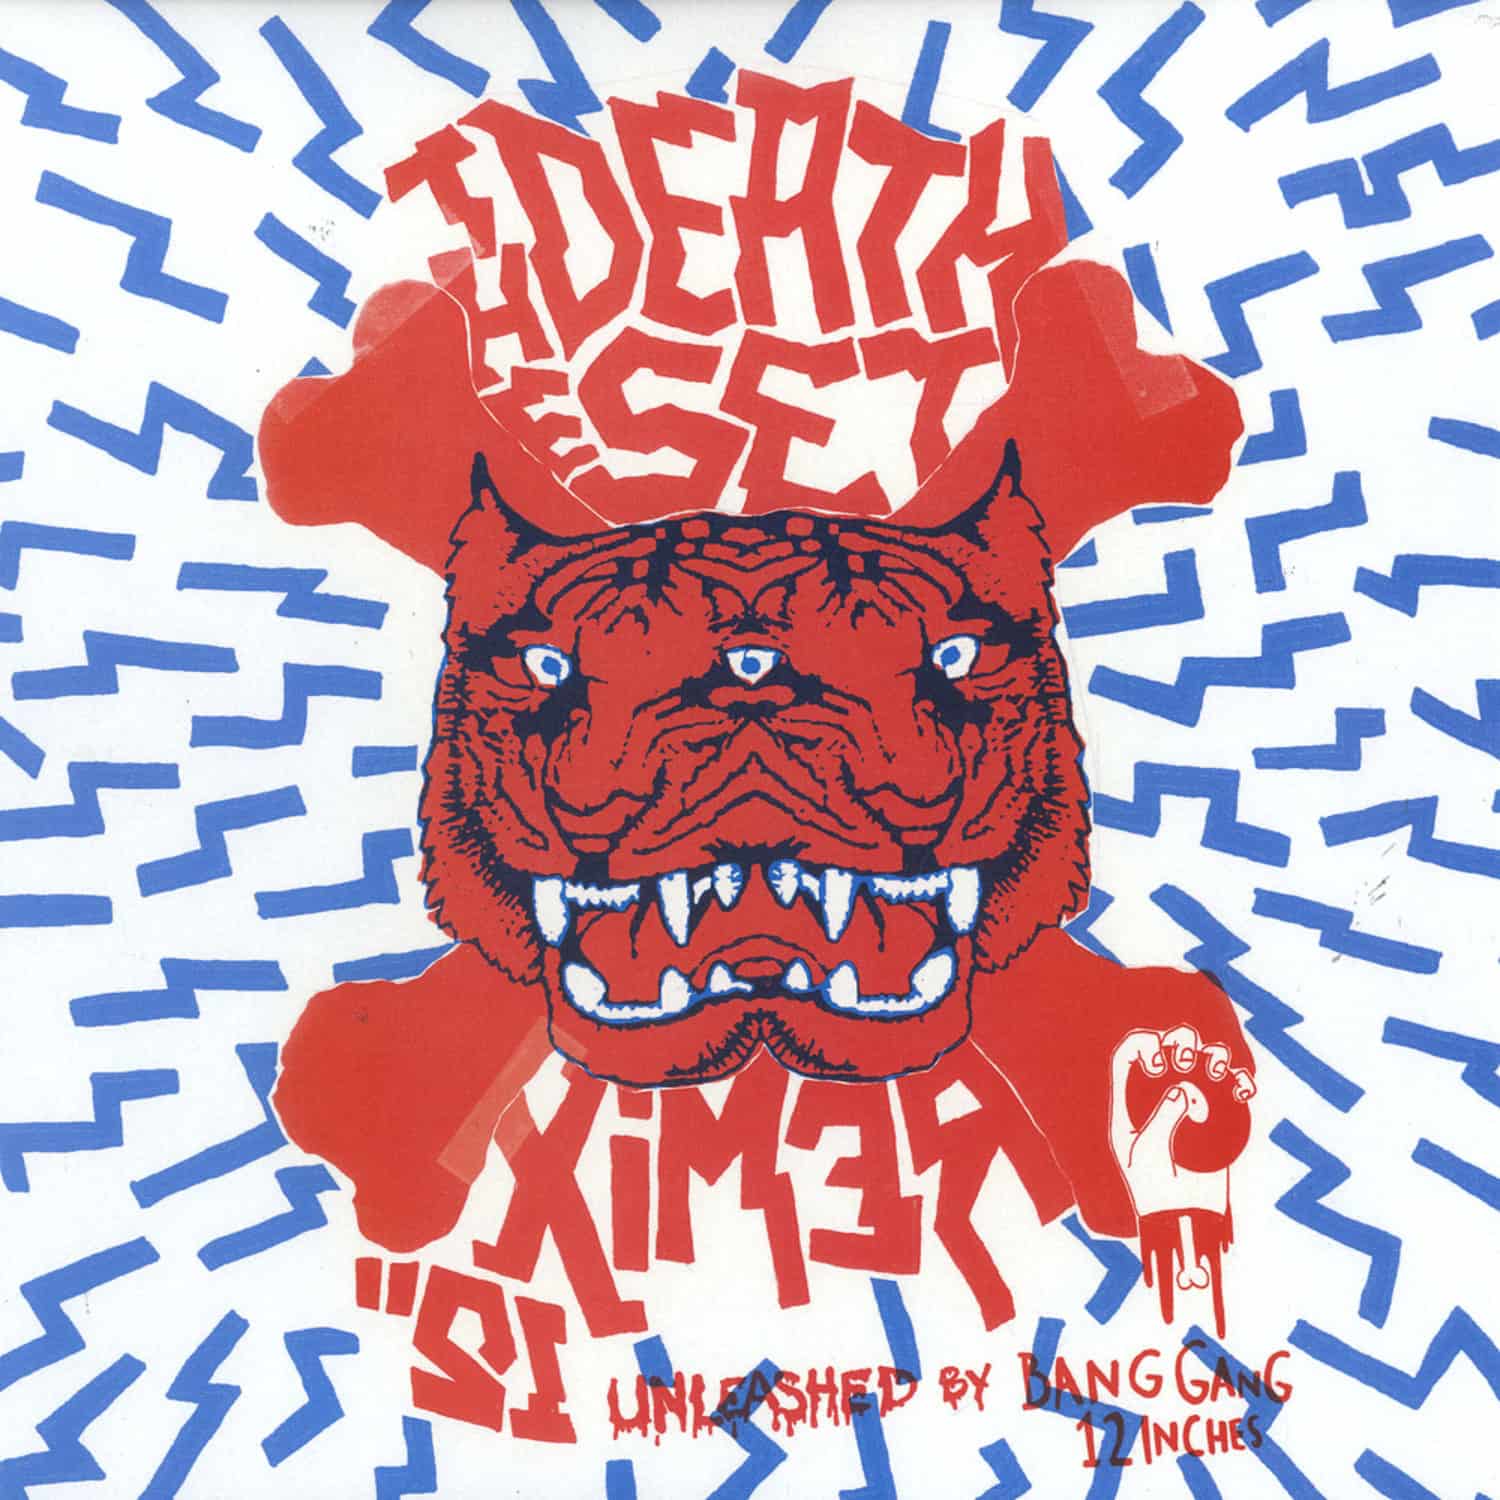 The Deathset - REMIX RELEASE